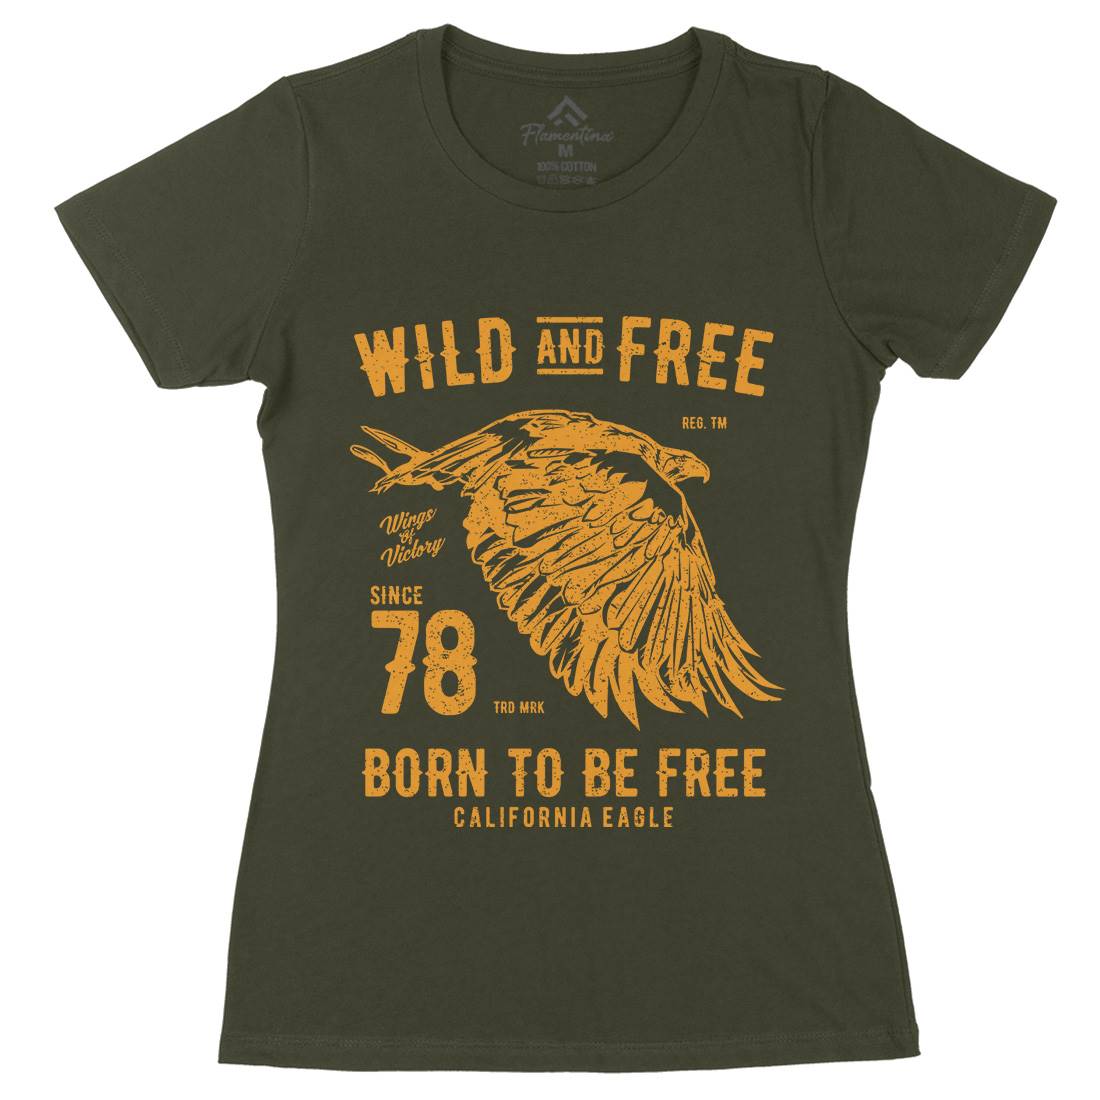 Wild And Free Womens Organic Crew Neck T-Shirt Army A792